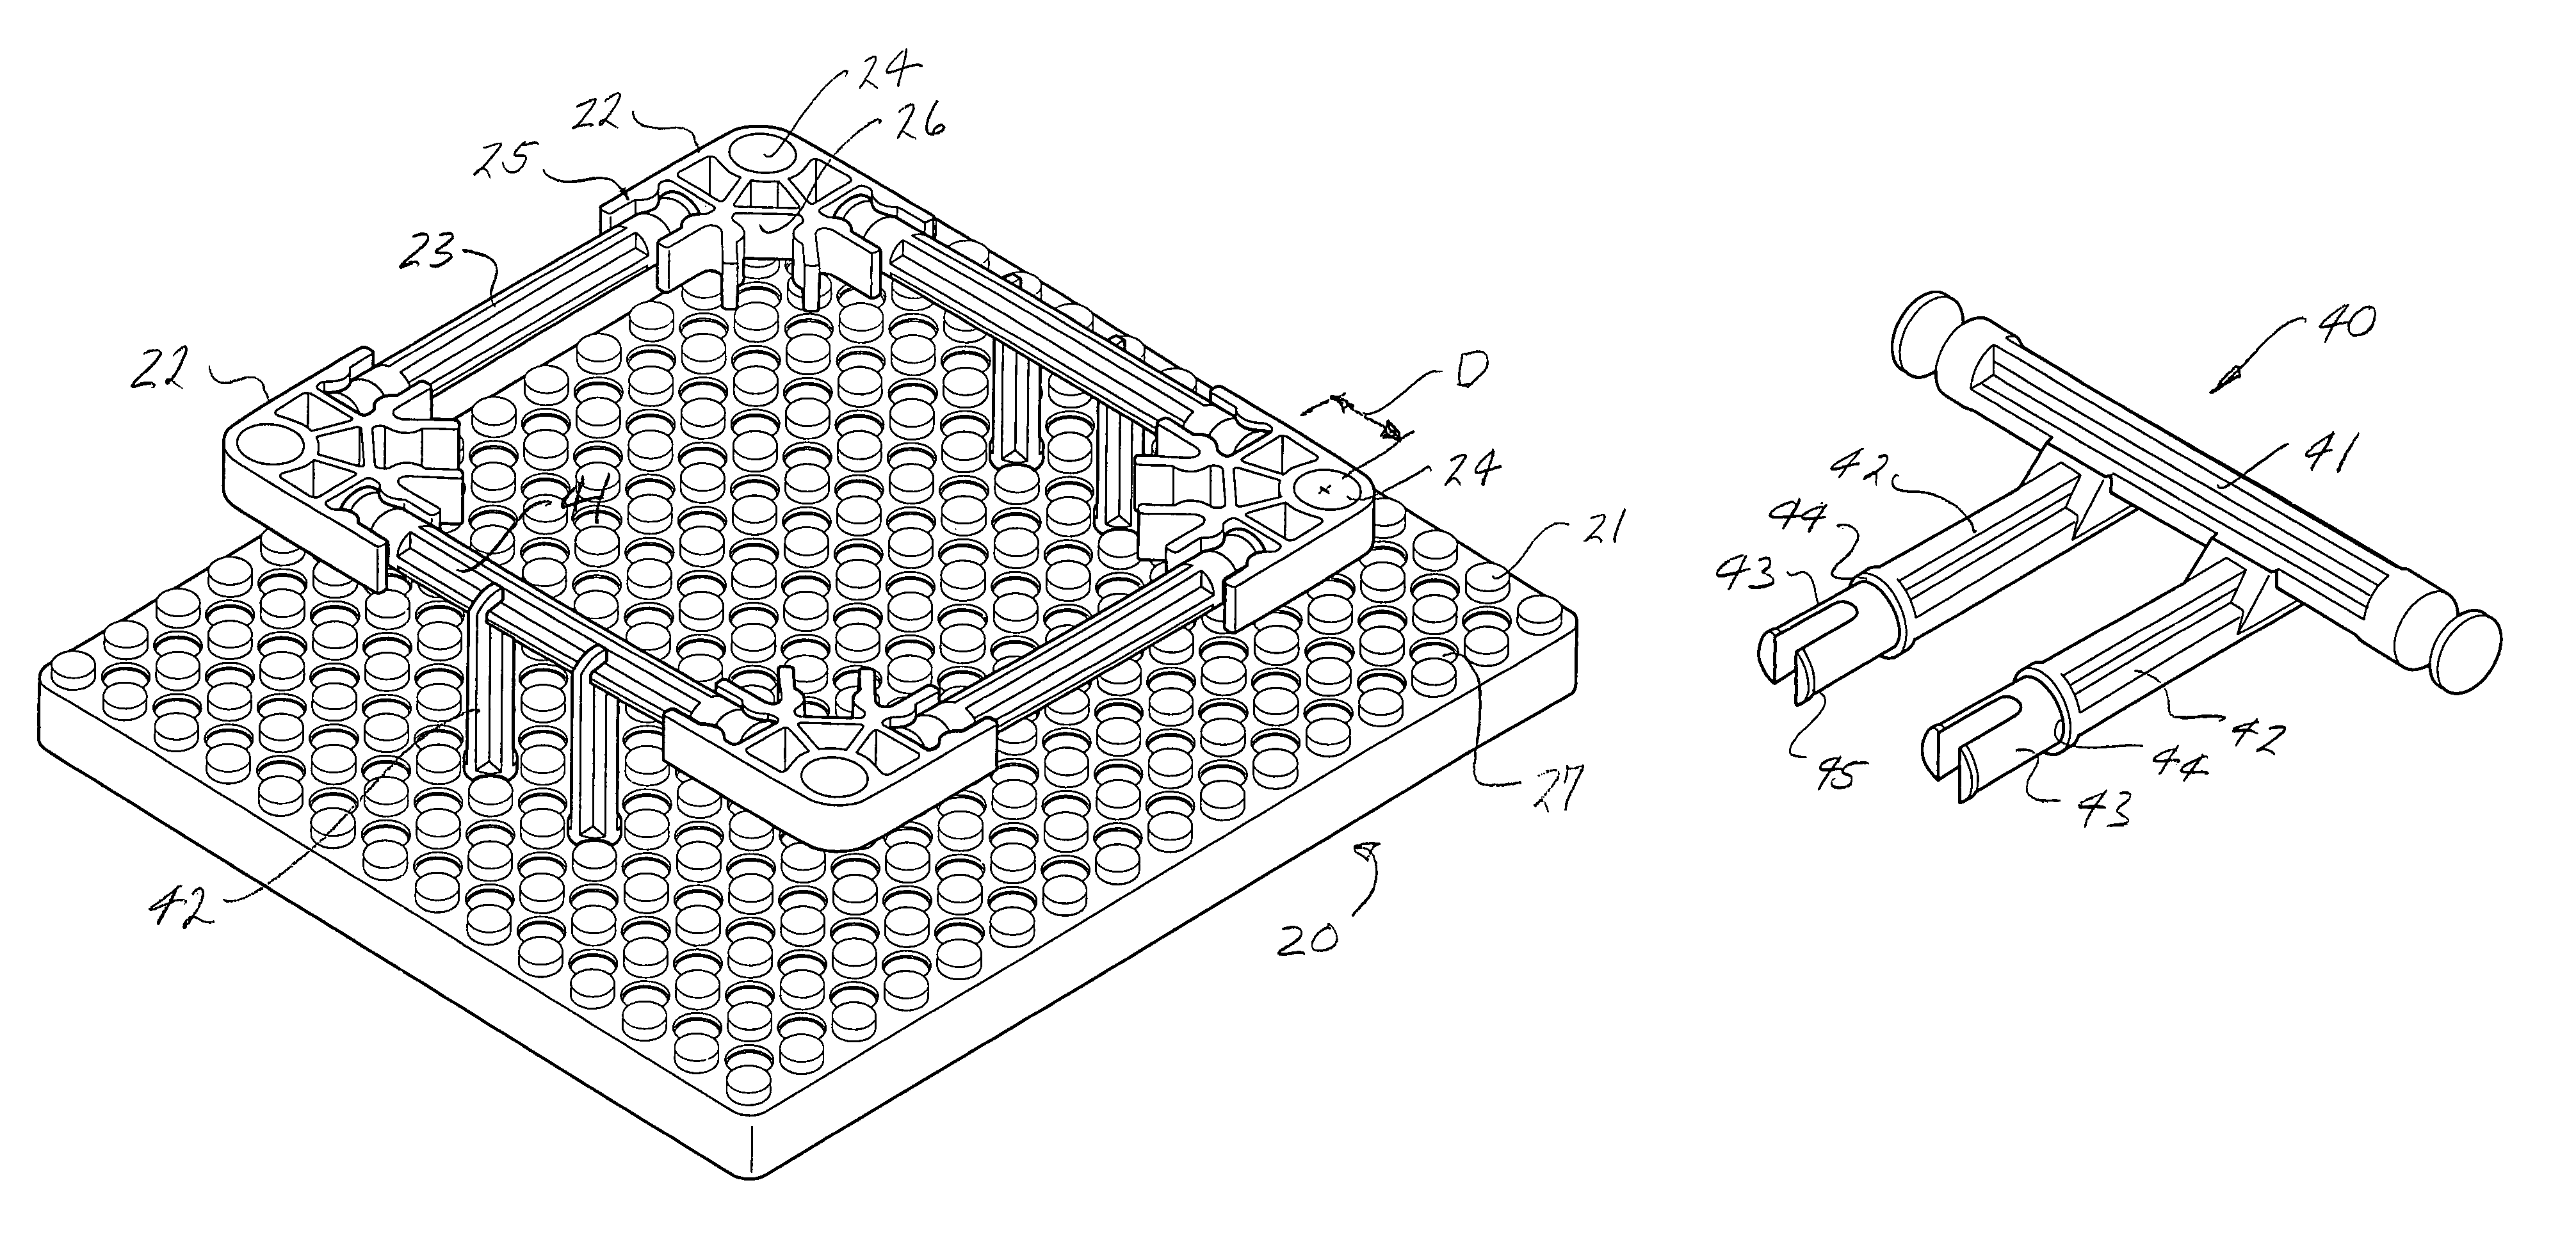 Offset matrix adapter for toy construction sets